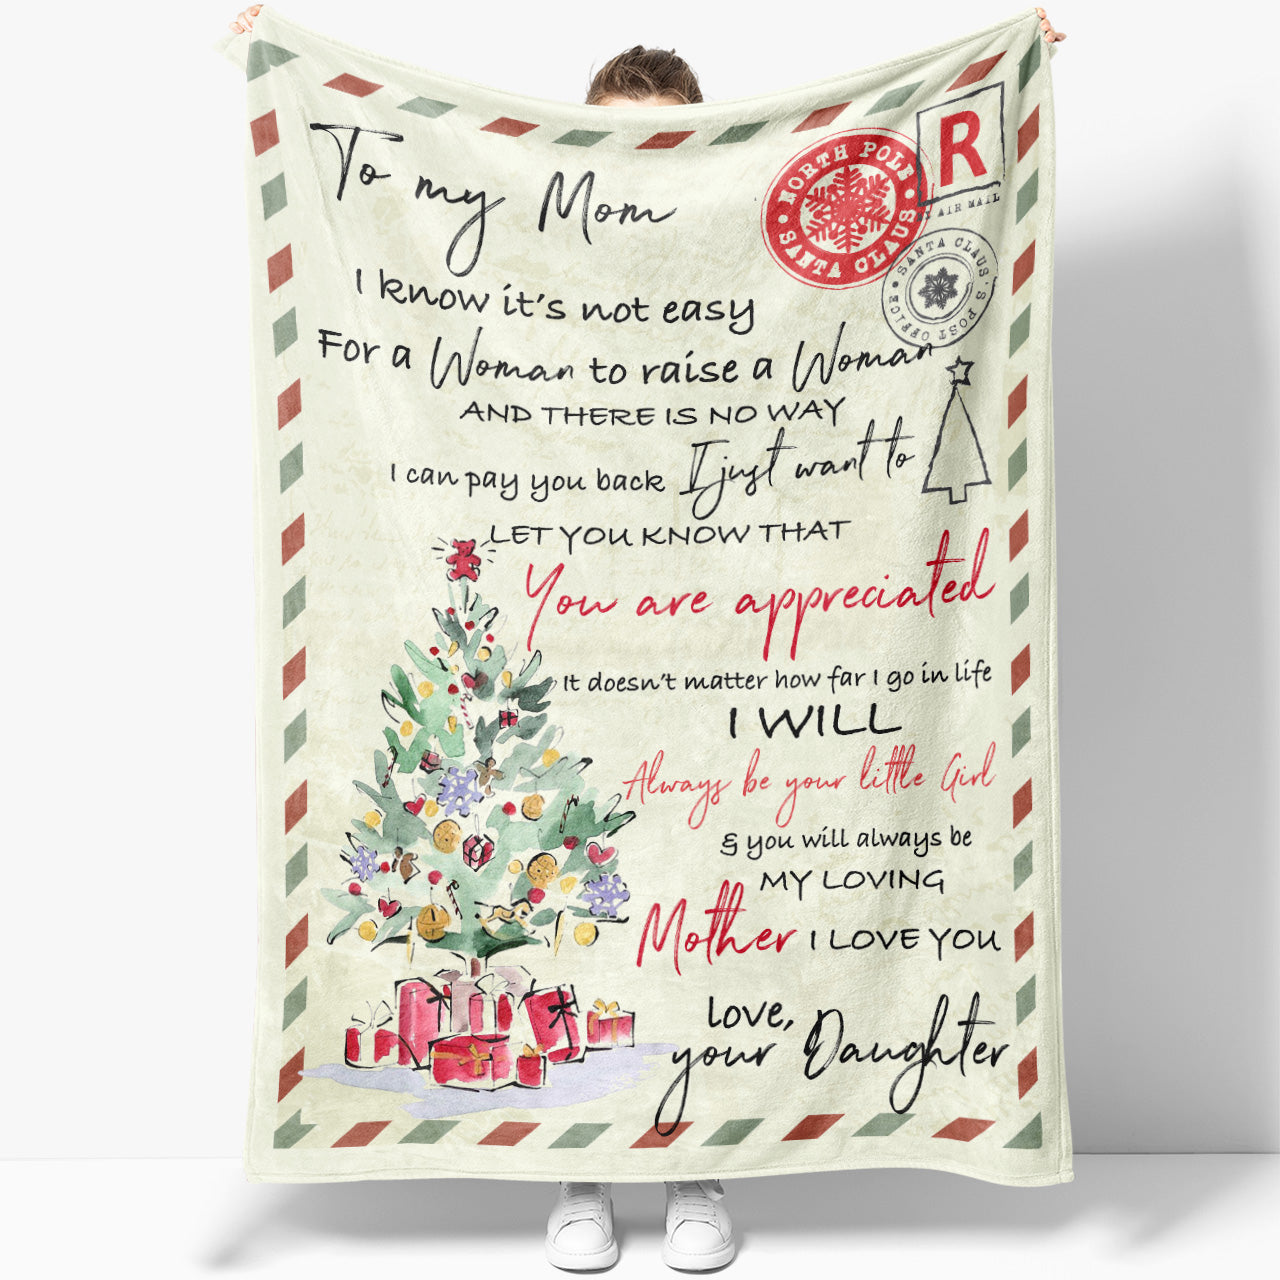 AMAZPRINTS Christmas Gifts for Mom, Women, Wife - Mom Christmas Gifts -  Gifts for Mom from Daughter,…See more AMAZPRINTS Christmas Gifts for Mom